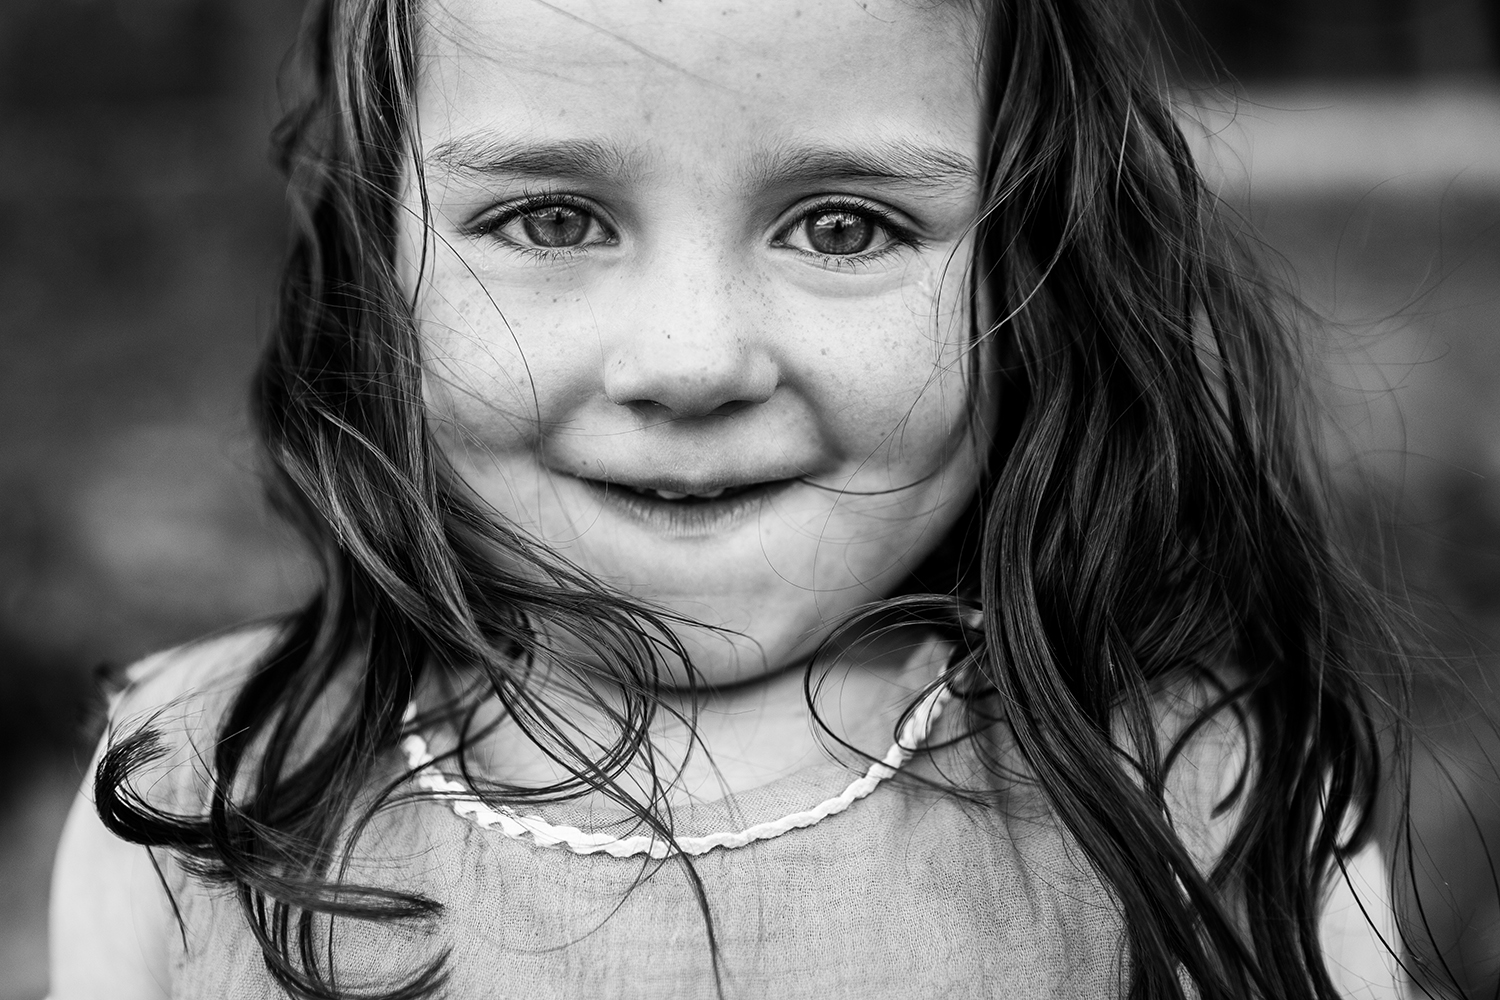 quirky editorial portrait of a little girl